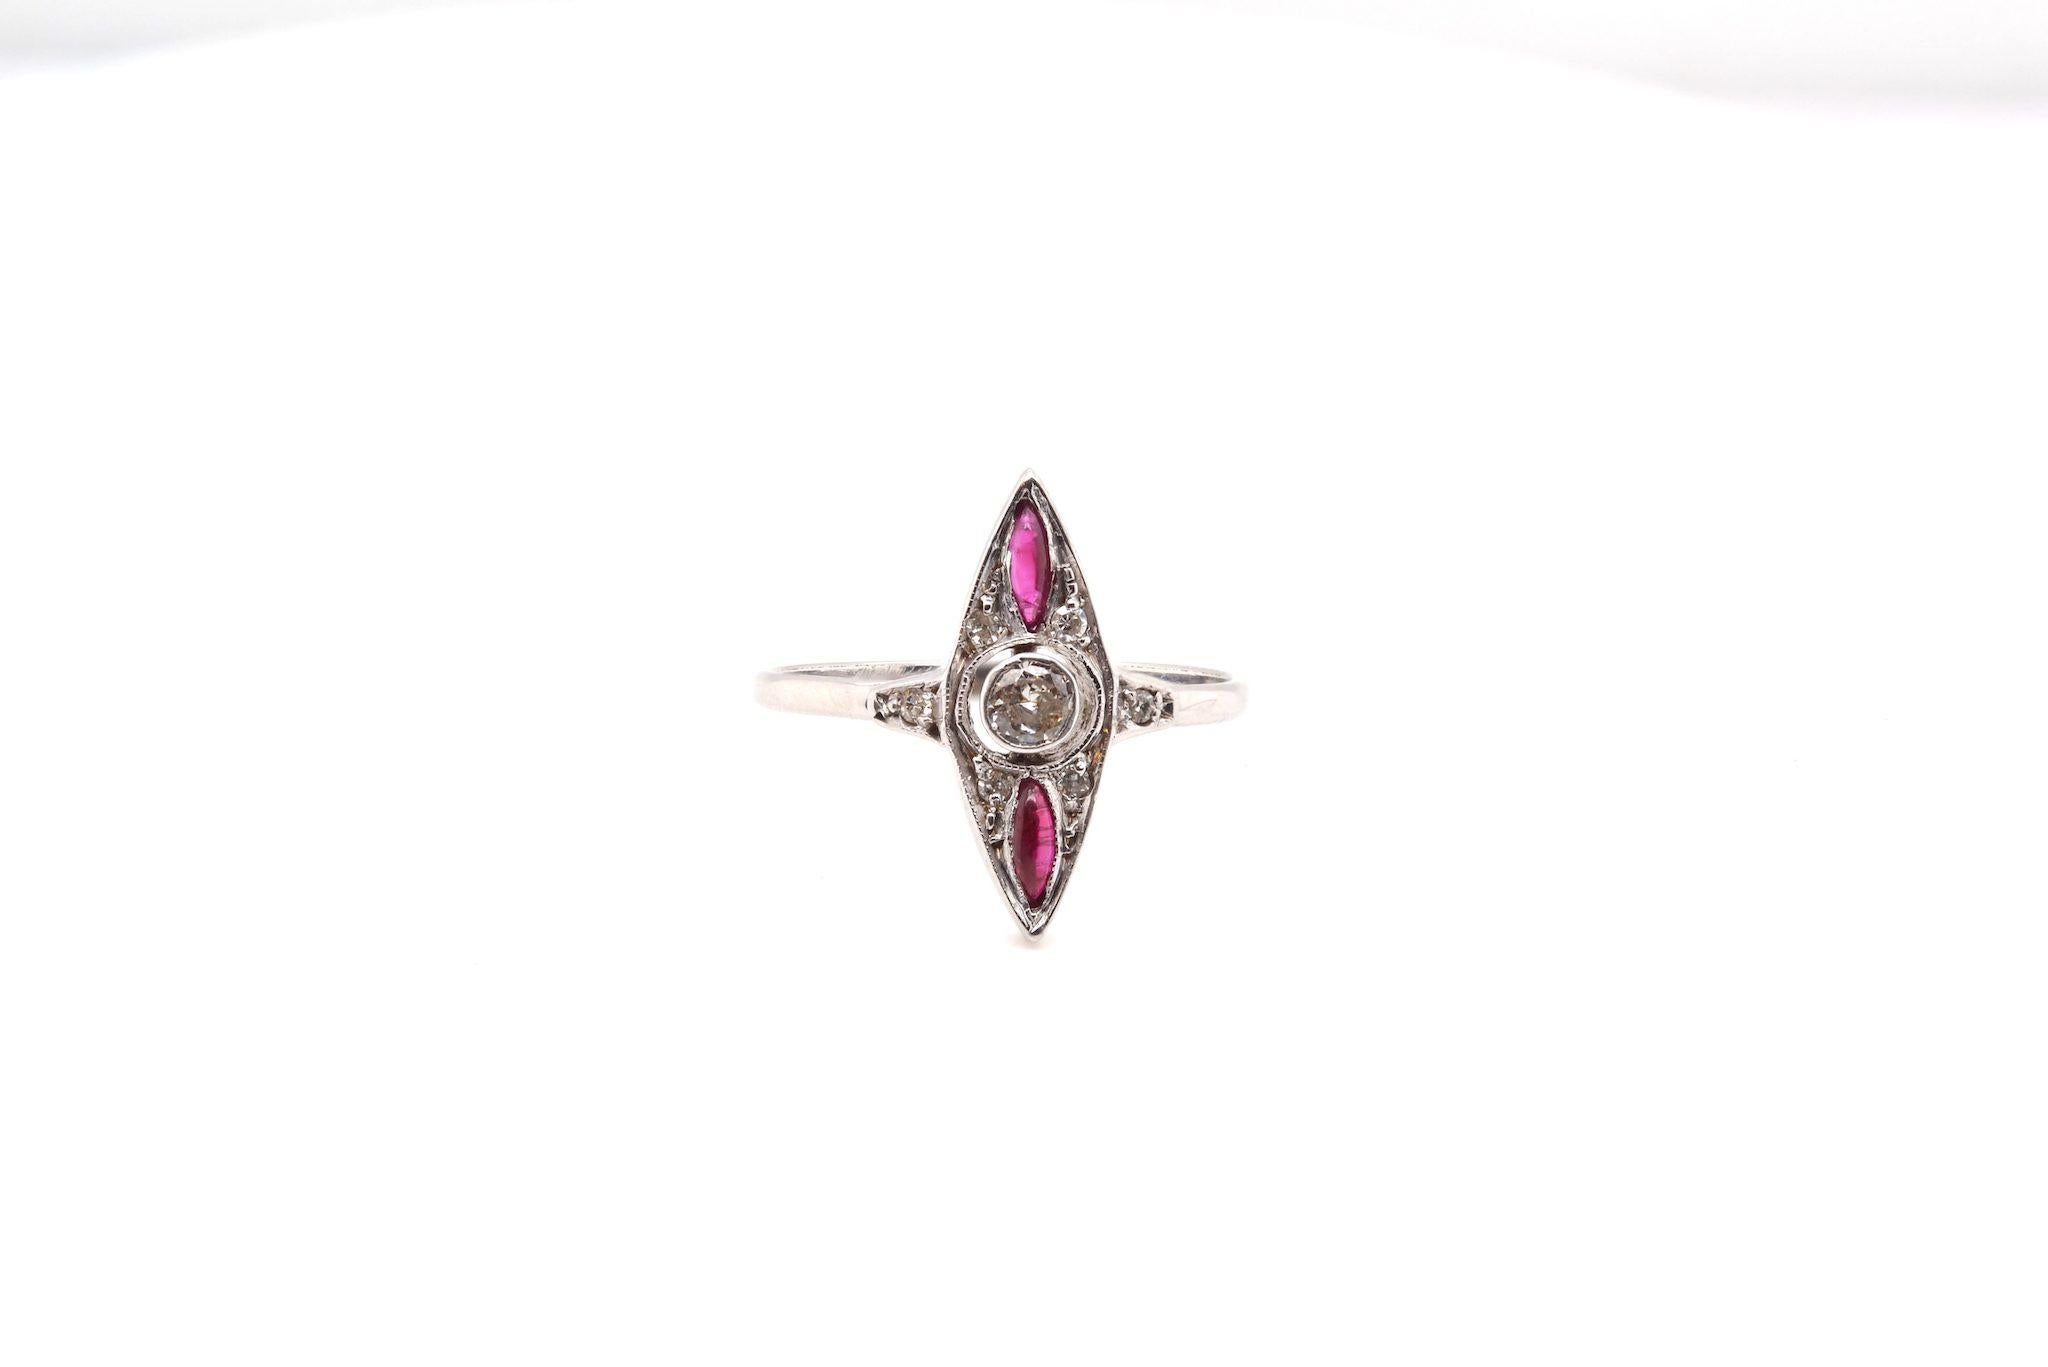 Stones: 1 old cut diamond of 0.20 ct and 2 shuttle rubies of 0.15ct or 0.30ct
Dimensions: 1.8cm x 0.7cm
Material: Gold and silver
Weight: 1.9g
Finger size: 55 and a half (free sizing)
Certificate
Ref. : 24974